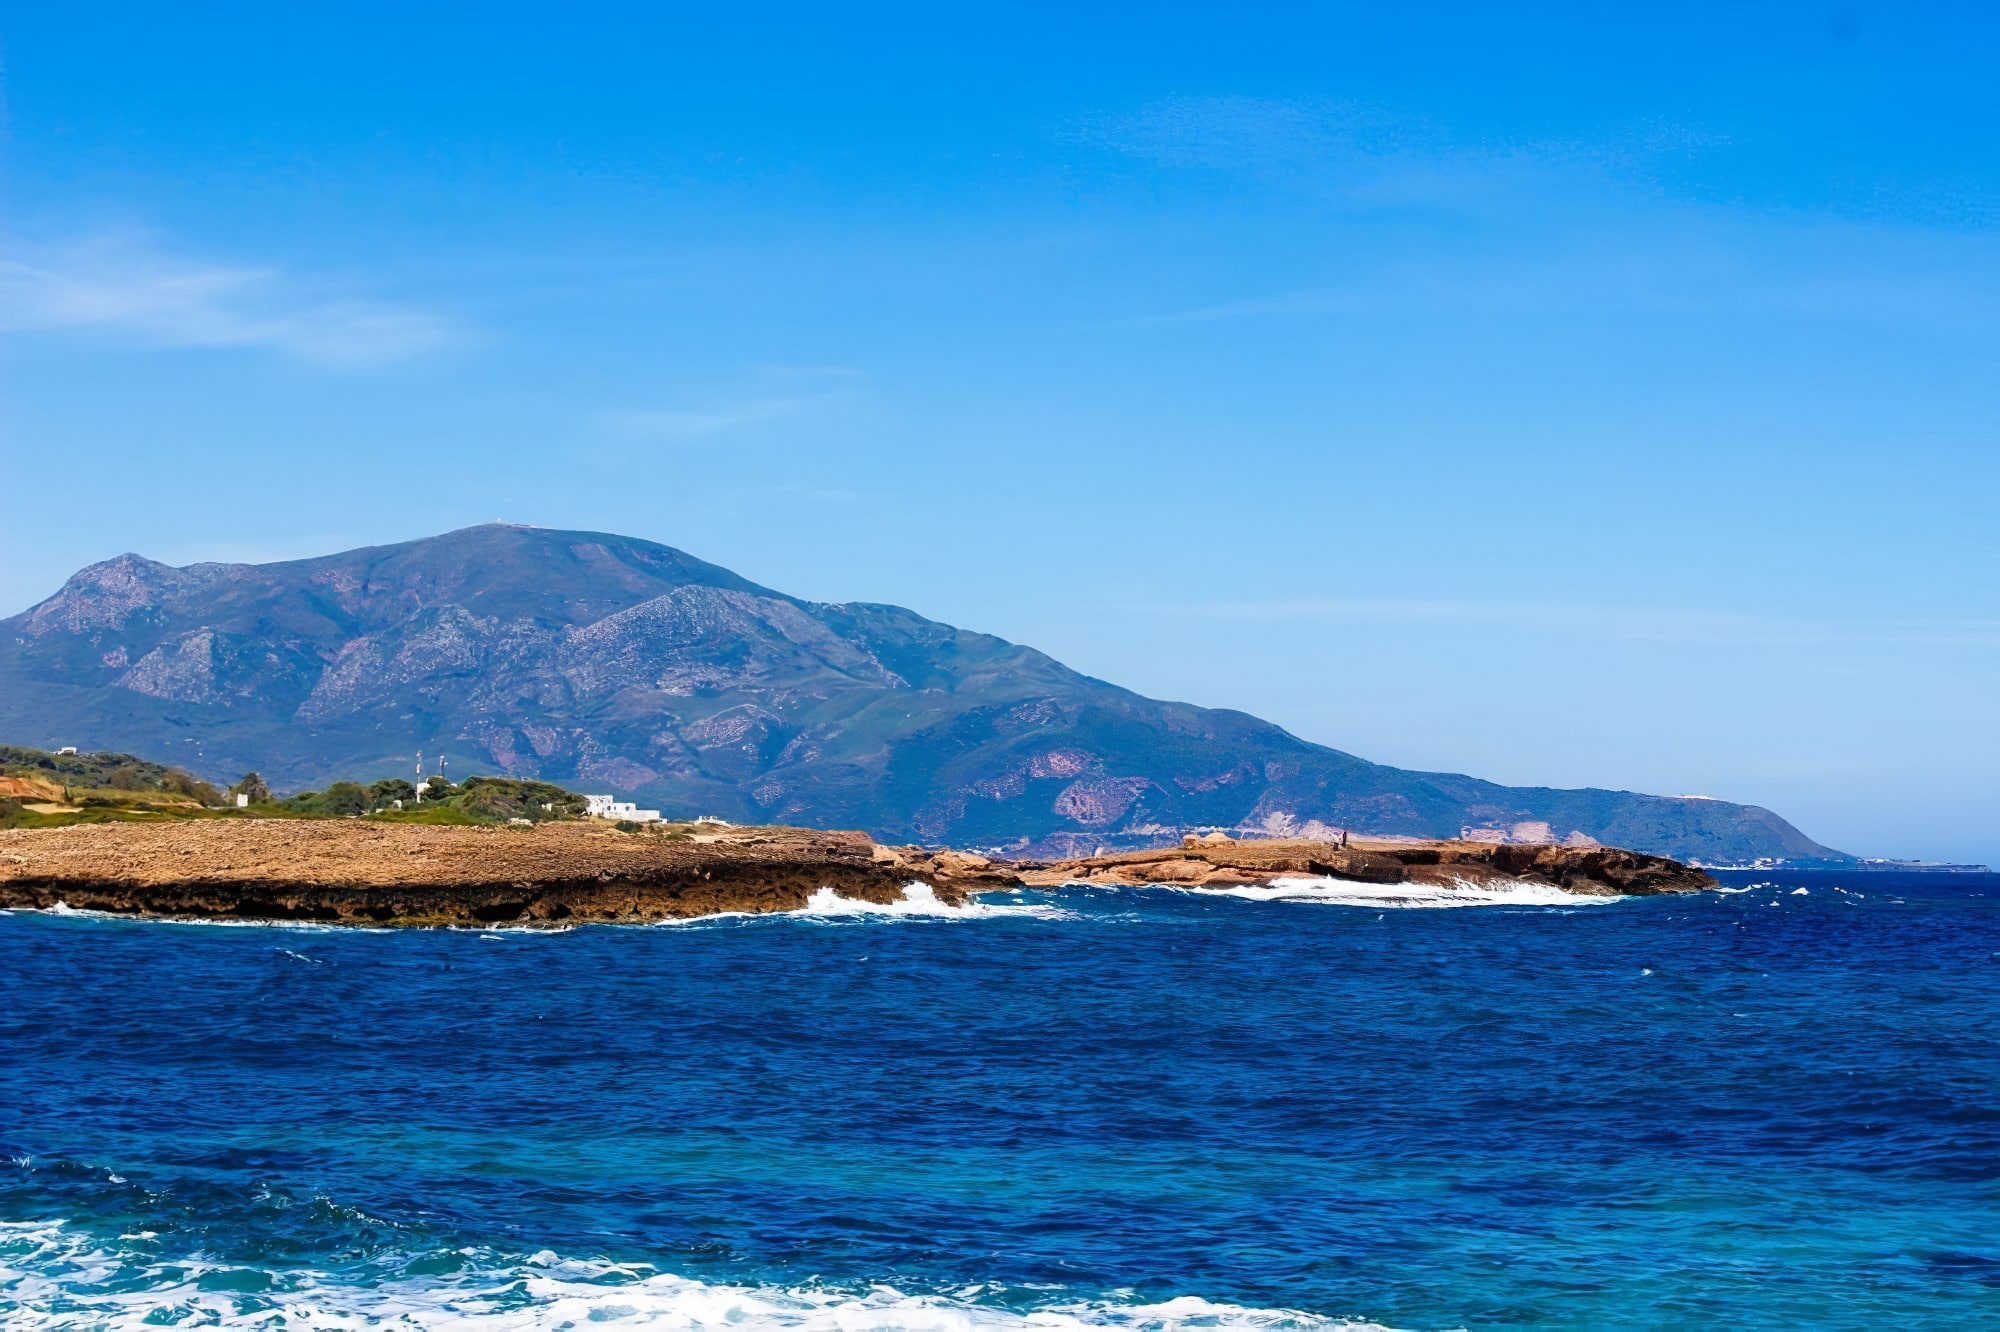 The 6 essential things to do in Tipaza, Algeria